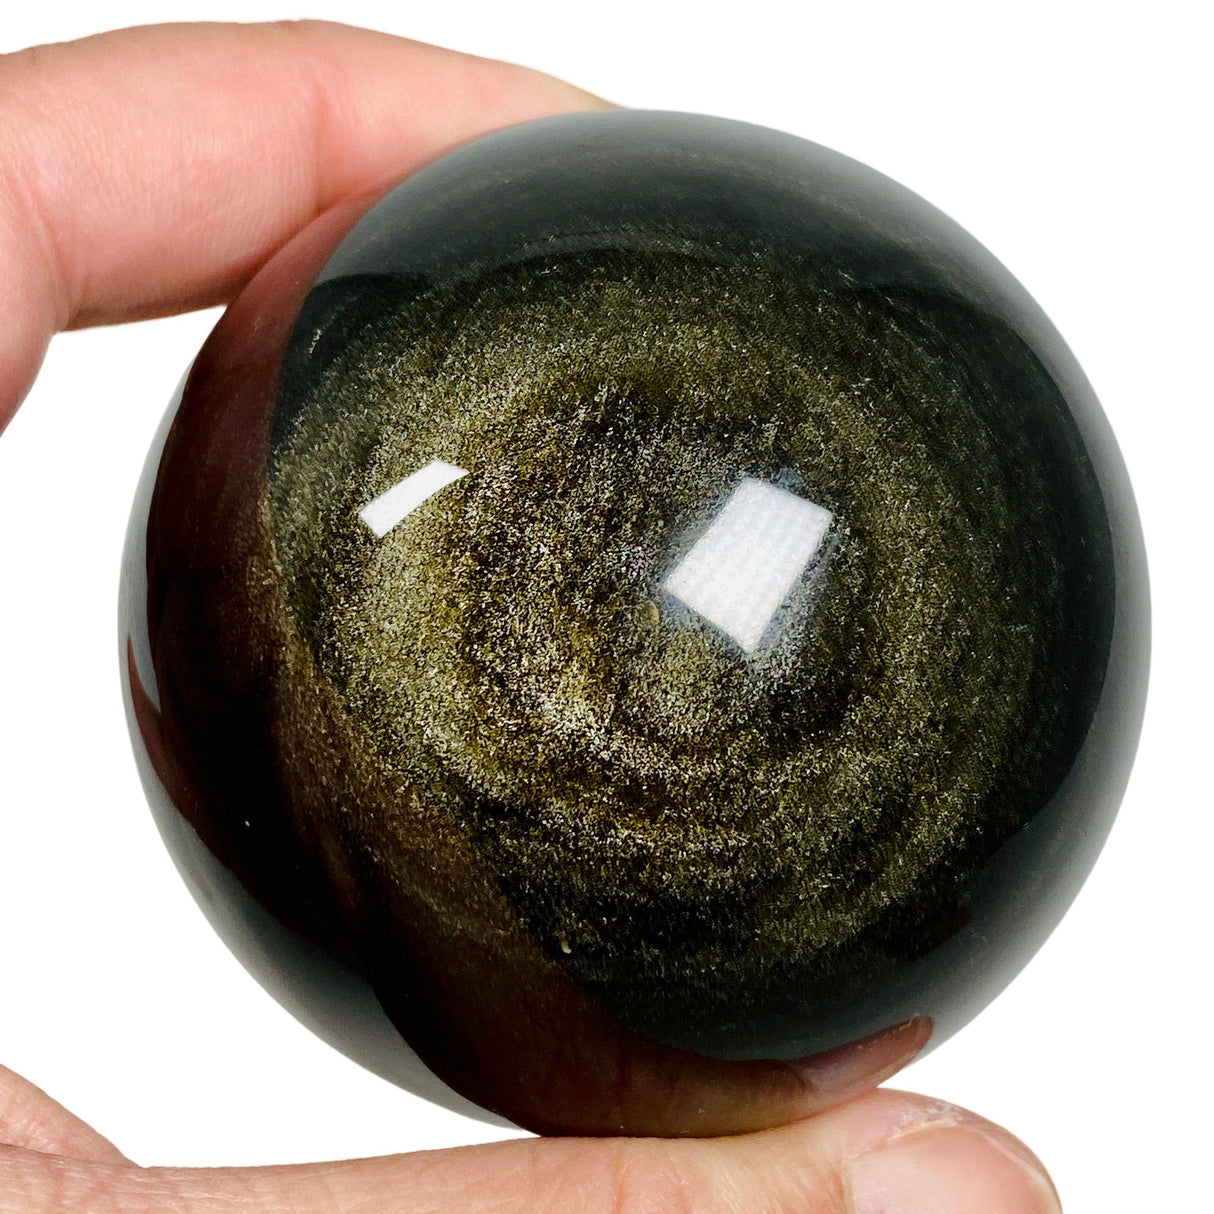 Obsidian Sphere GOBS-02 - Nature's Magick